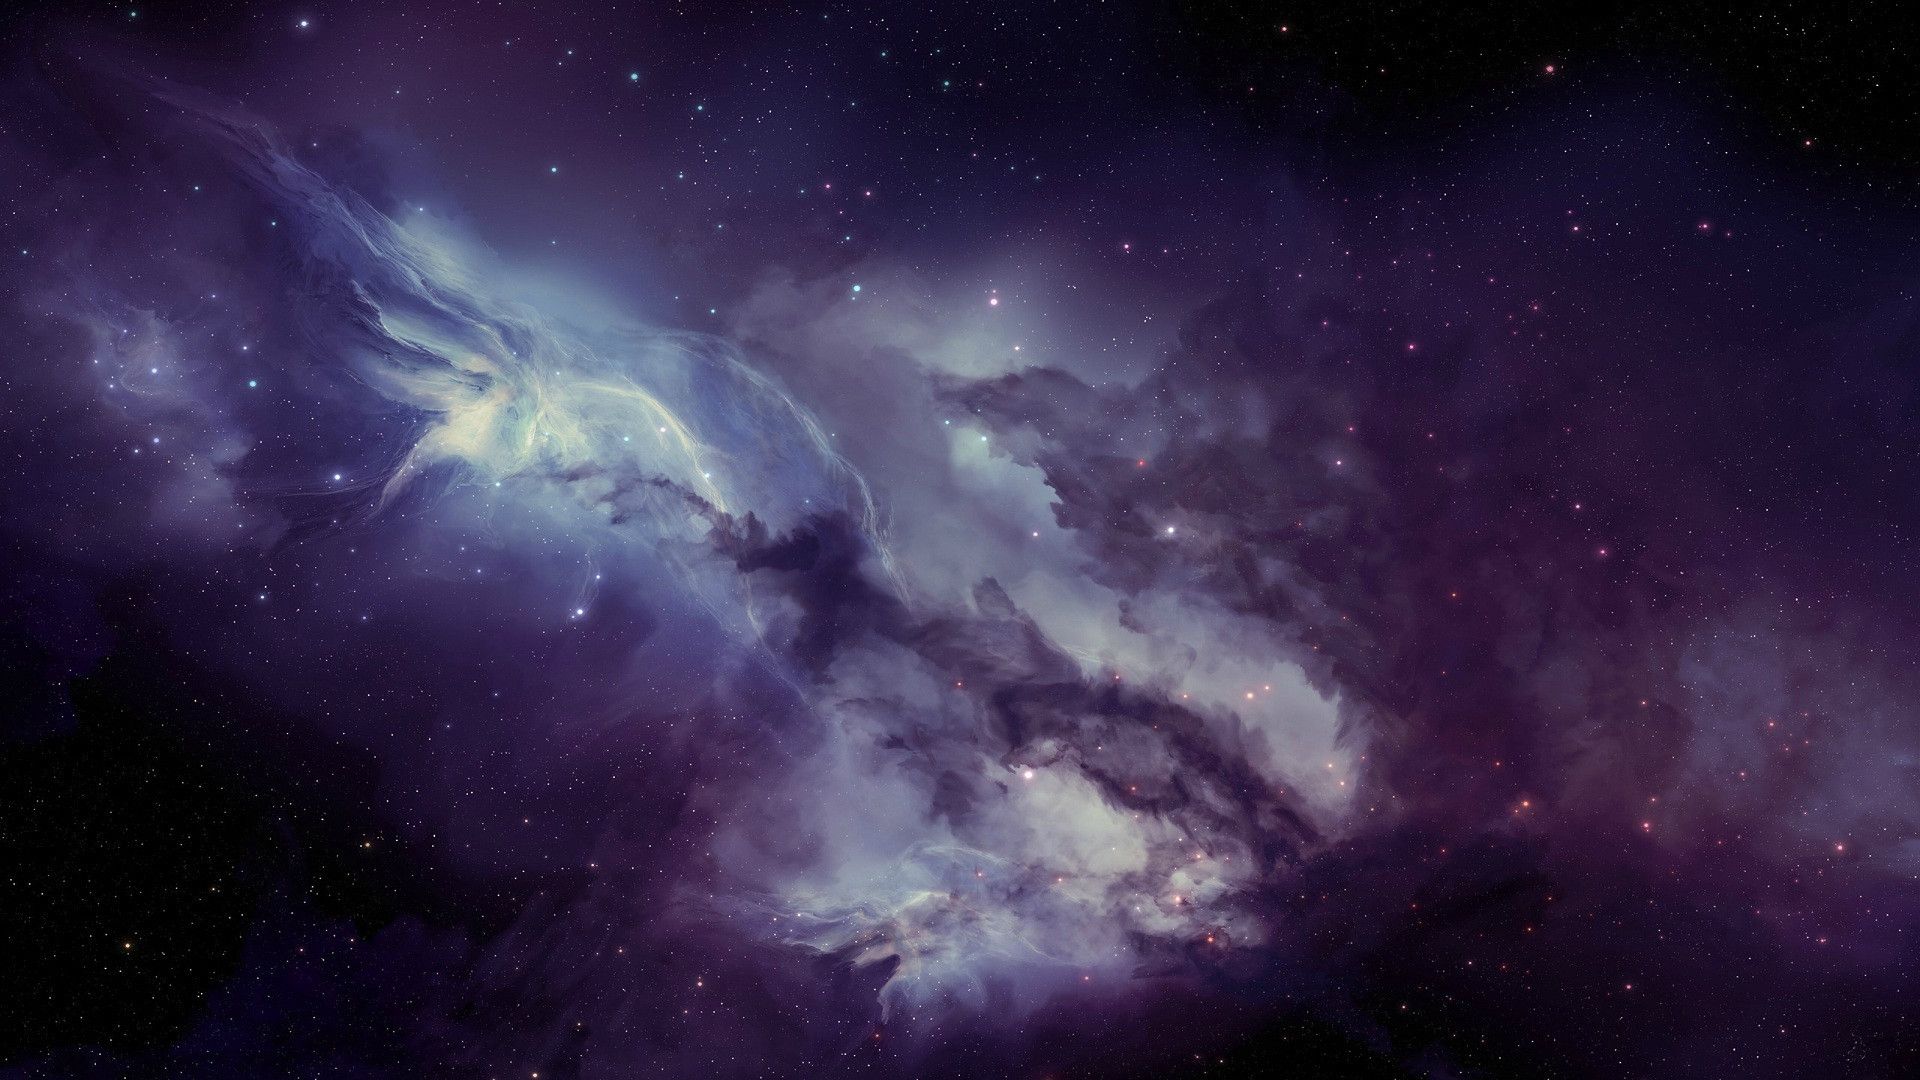 Some Space Wallpaper